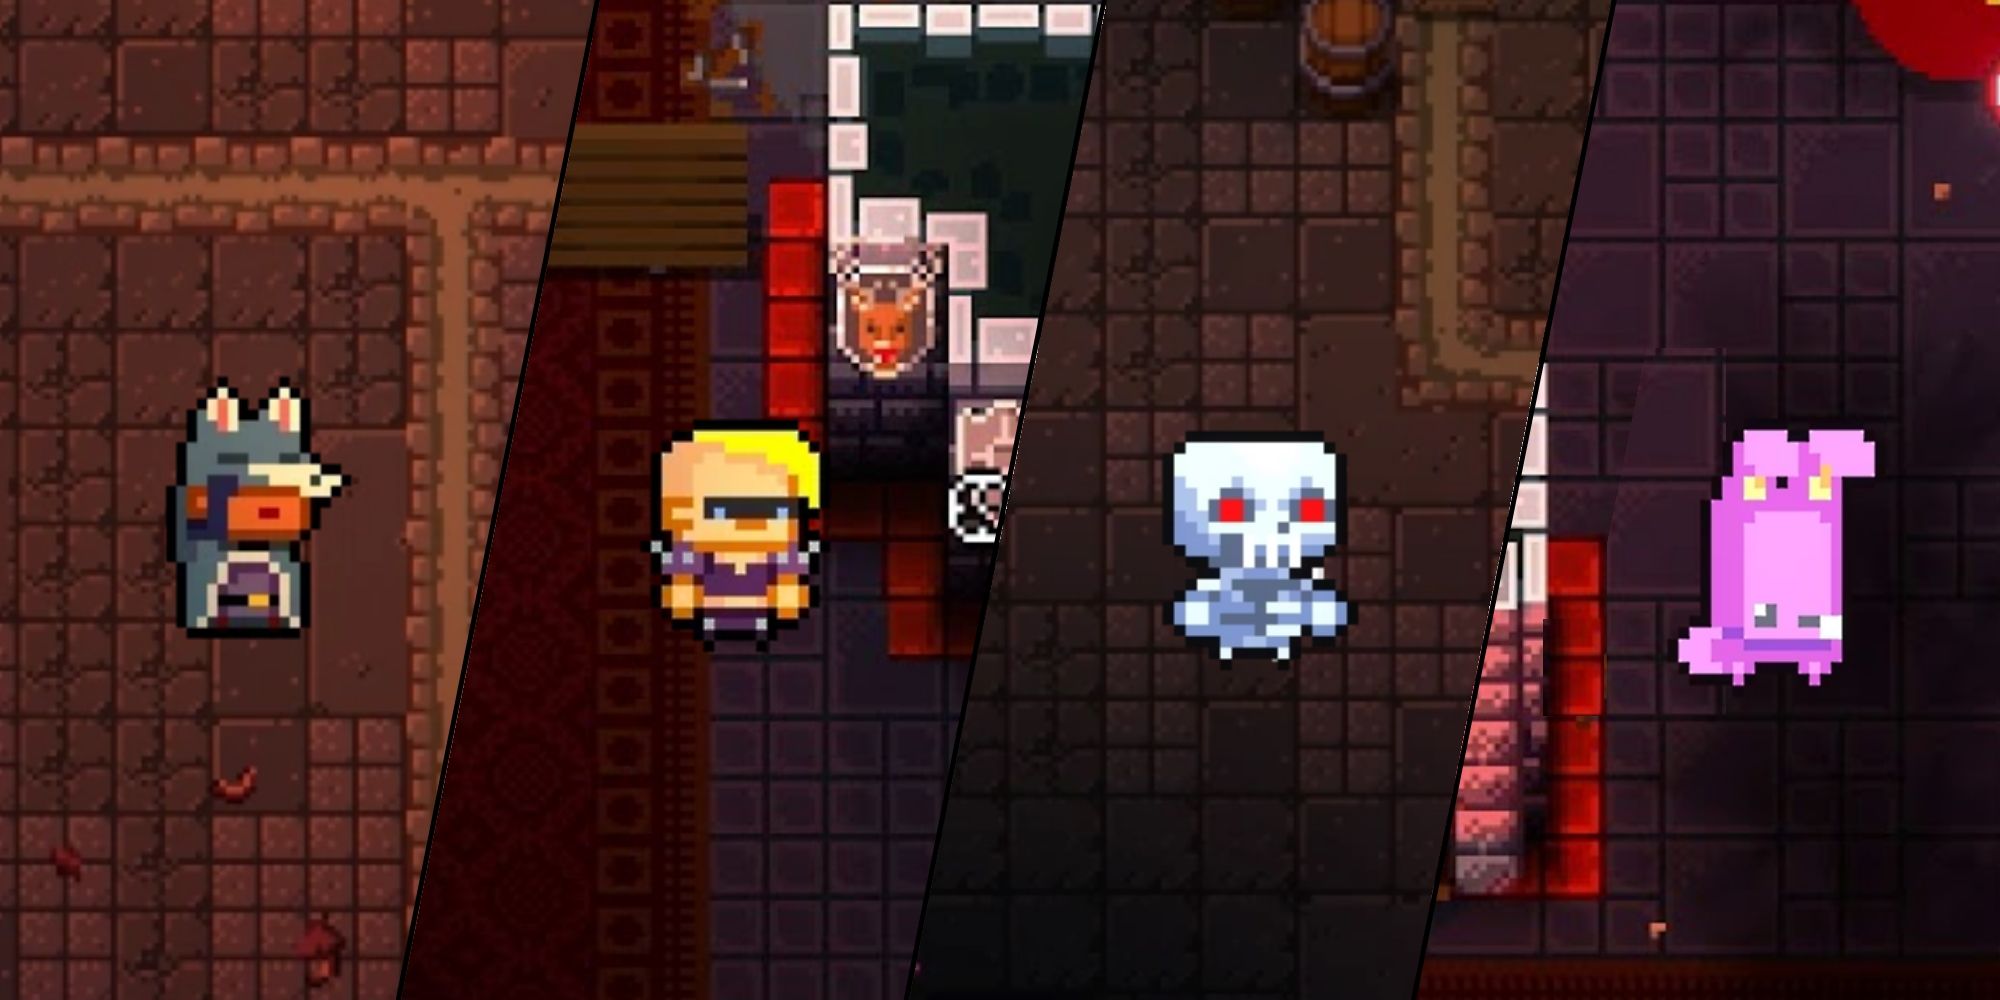 Enter The Gungeon Every Playable Skin Featured Image (with the Termbot, Jailbird, Beastmaster, and Bunny skin shown)